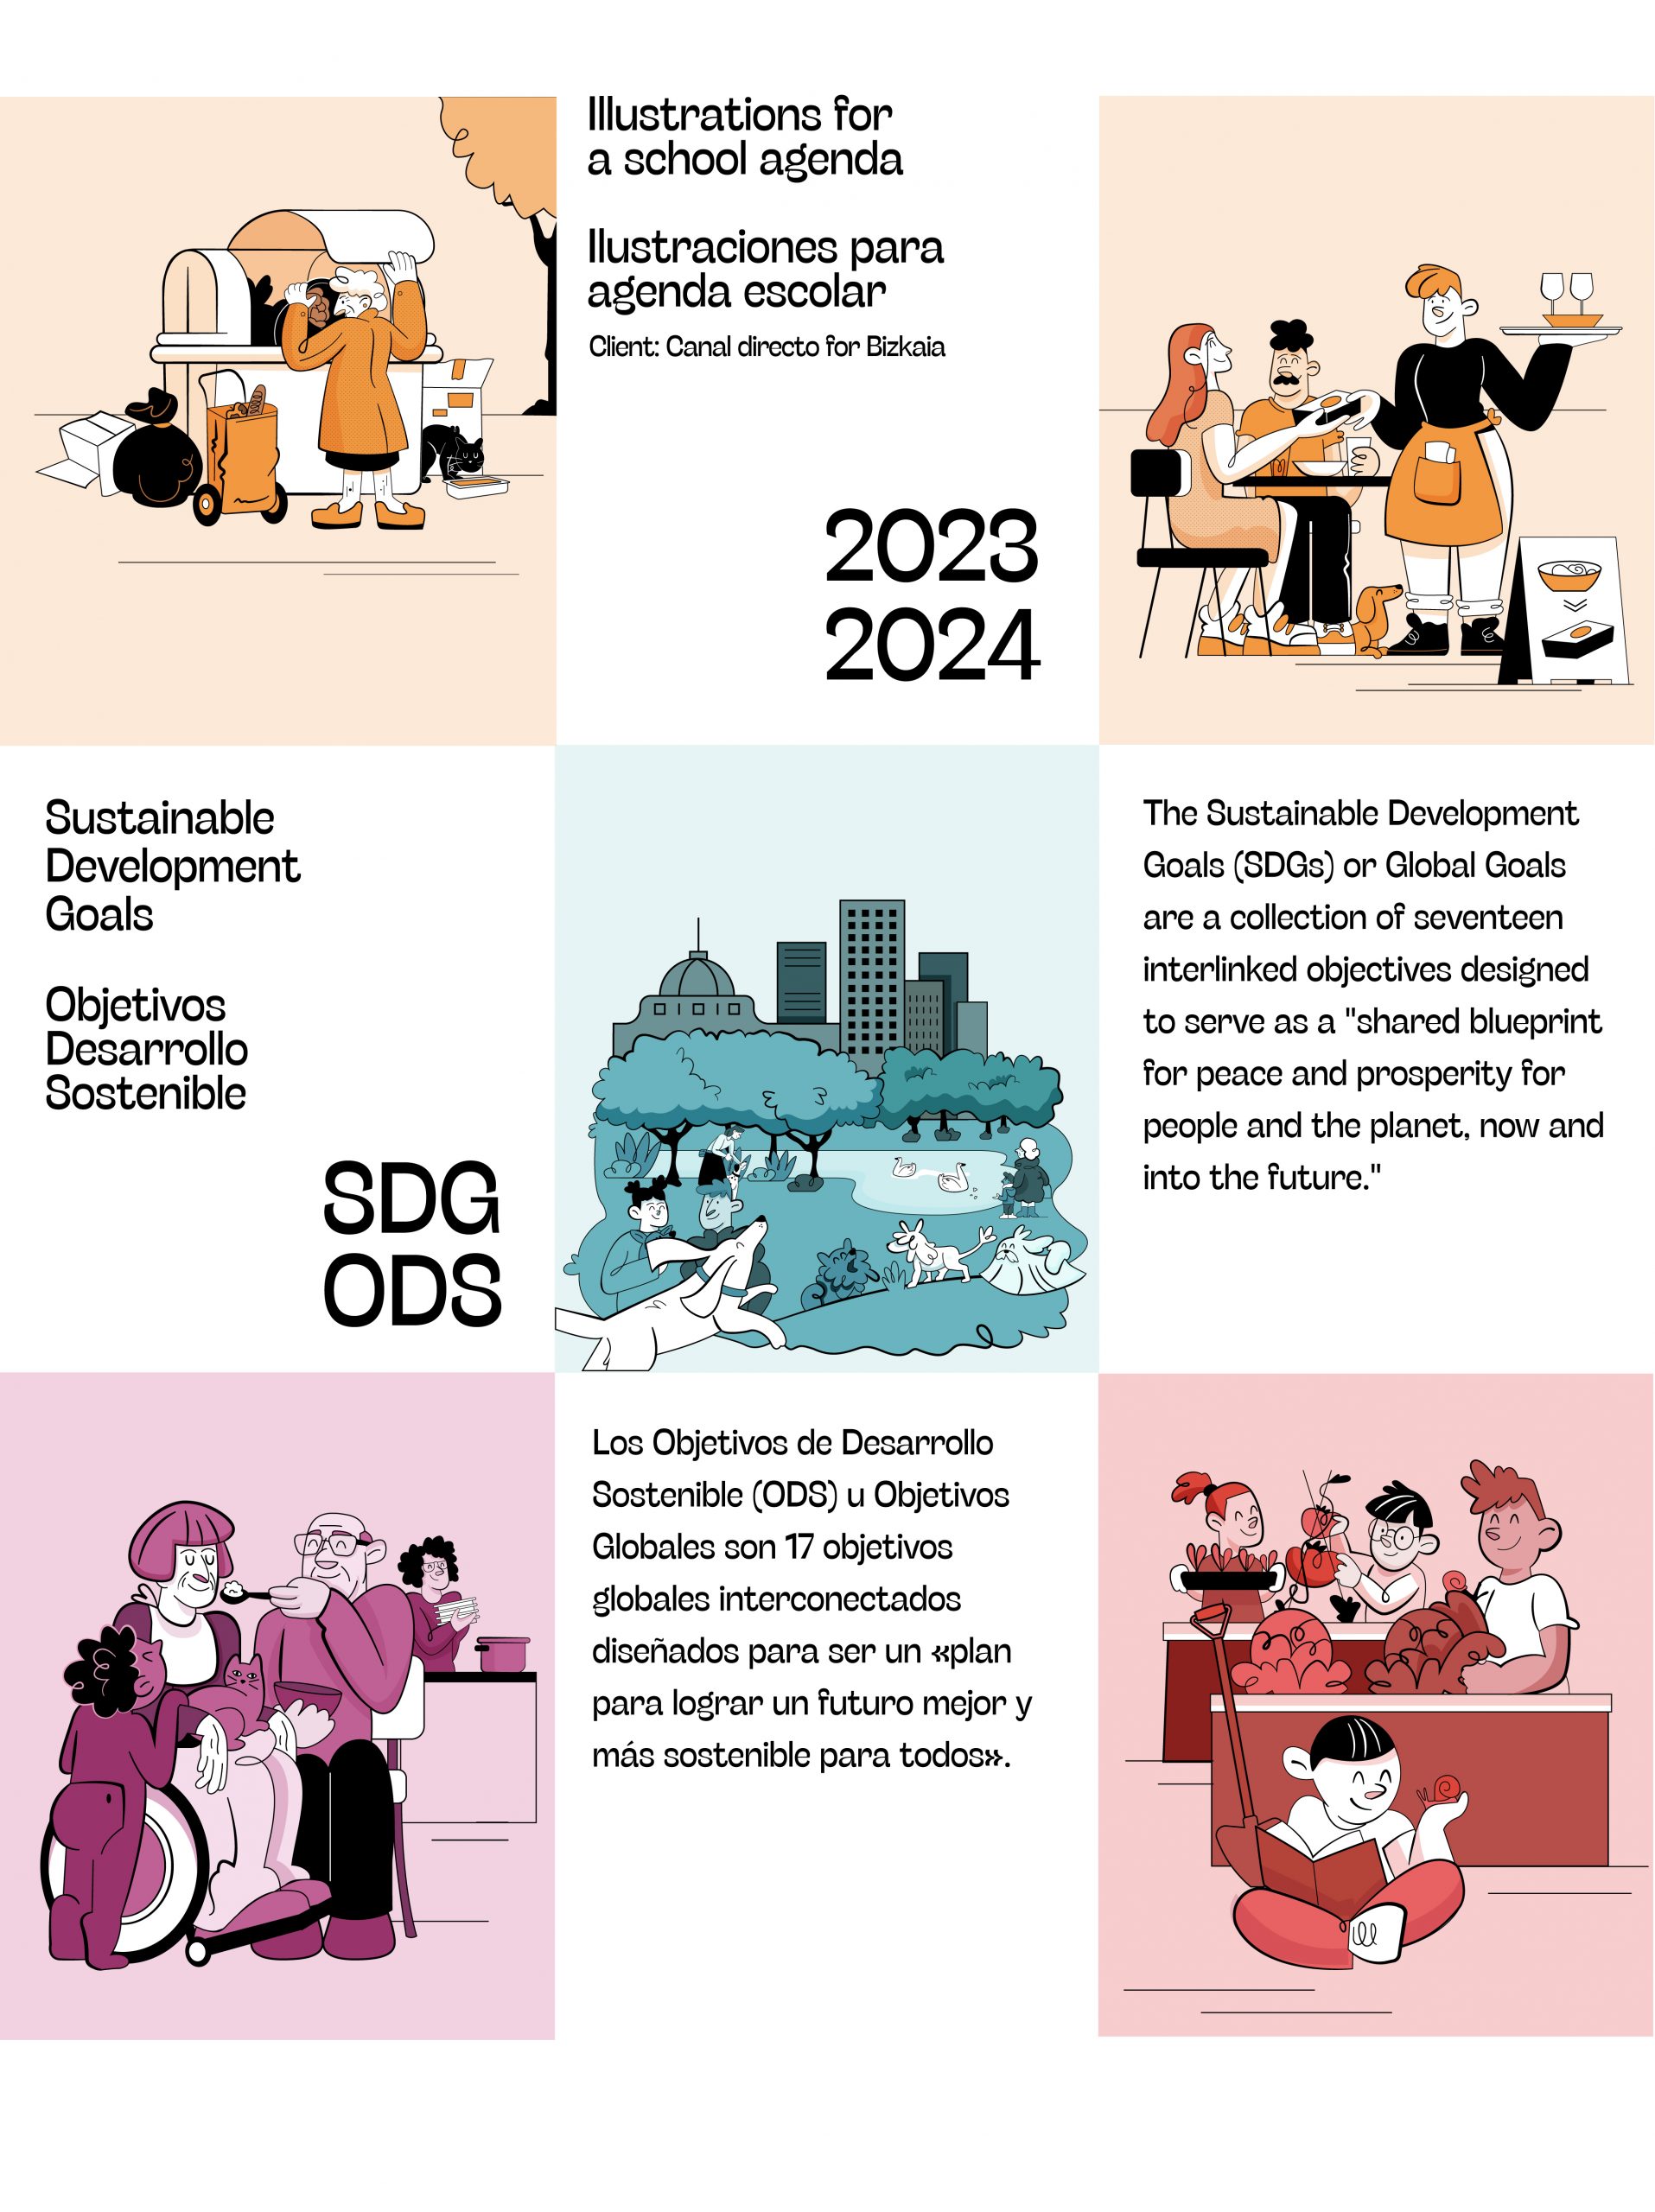 2030 agenda illustration, vector drawings for an school agenda with different people doing several things